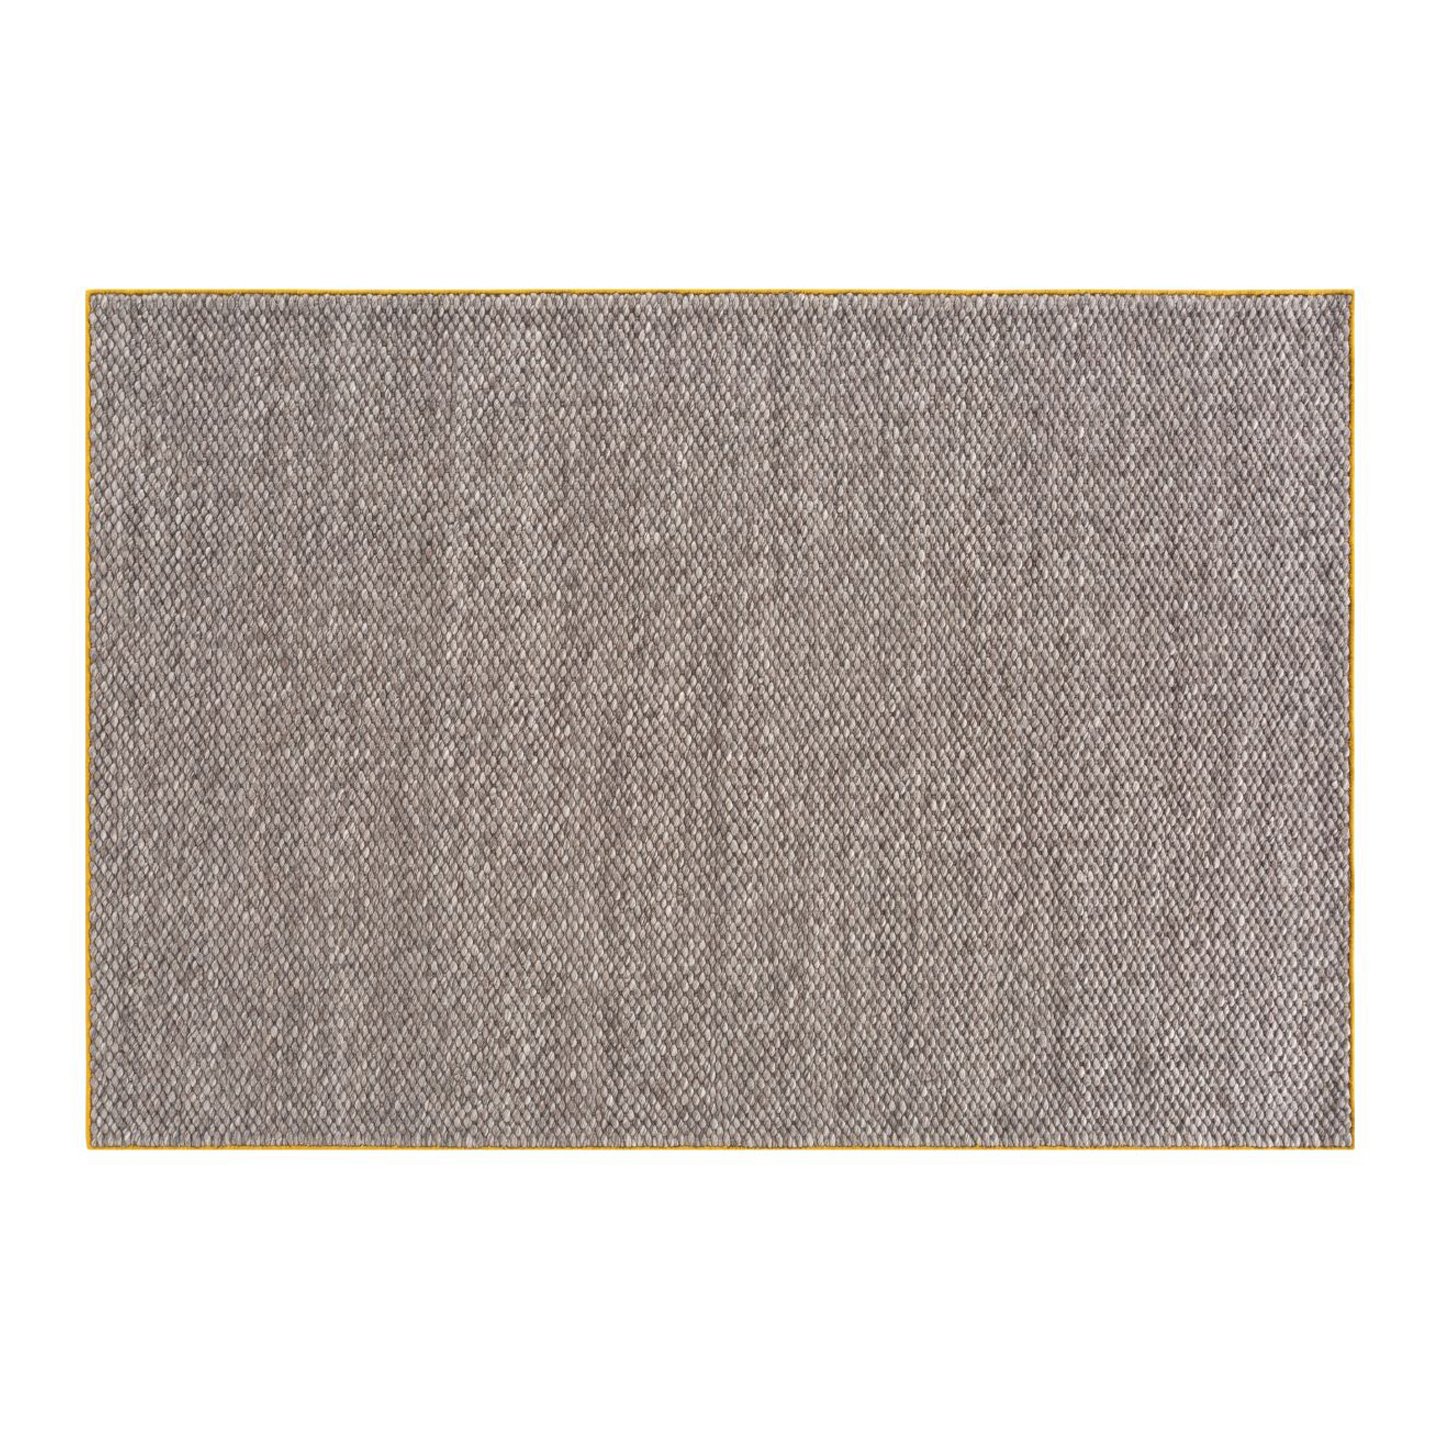 Haworth Mangas Natural Rug in grey and white color and plain pattern